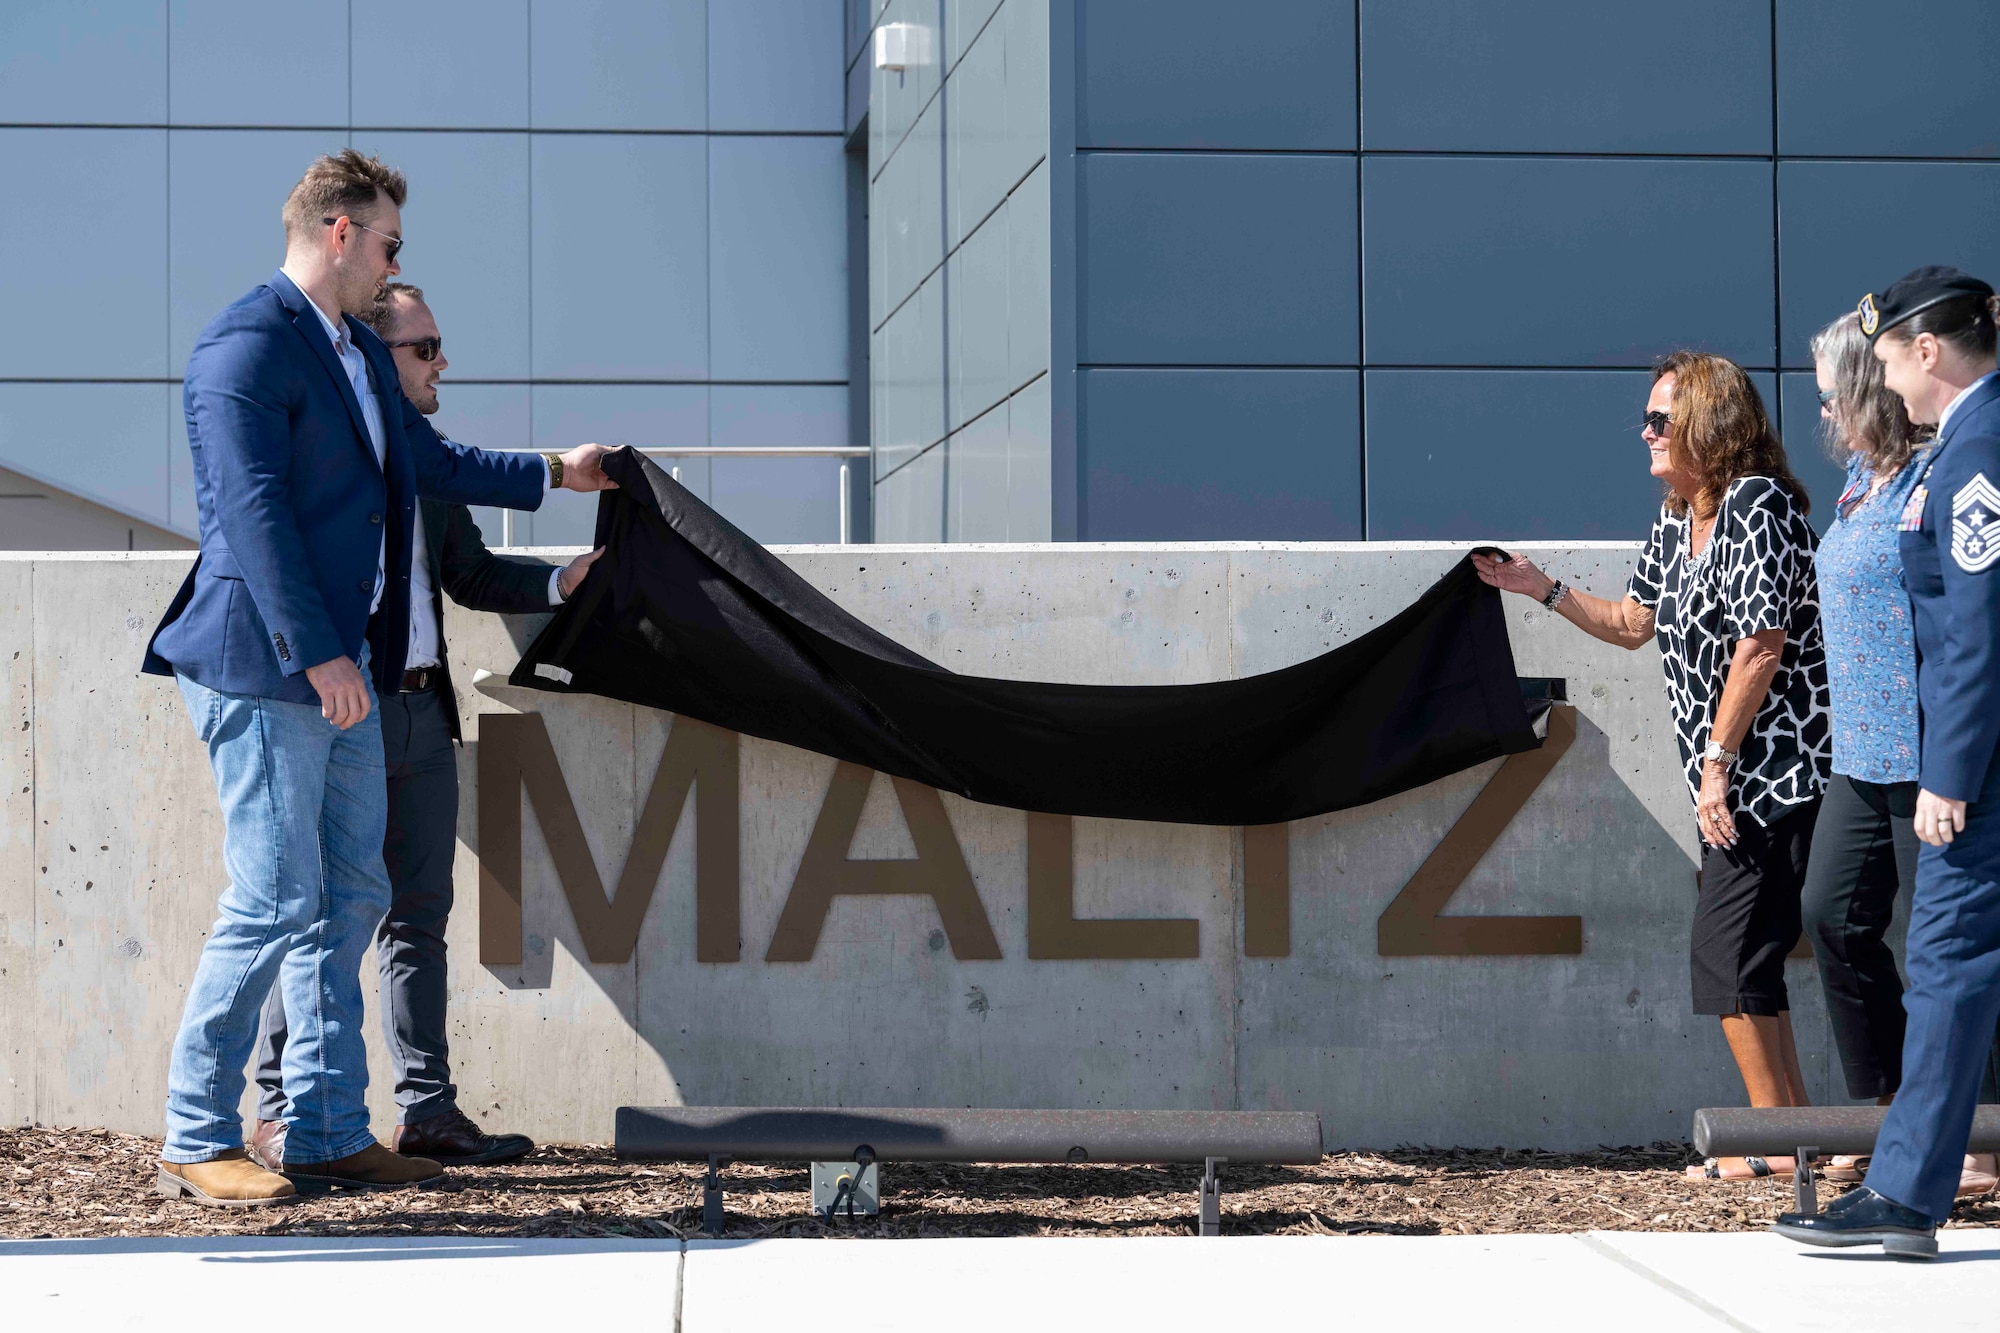 A group of people remove a cloth unveiling the official name of a new aquatic training center named after U.S. Air Force Master Sgt. Michael Maltz.